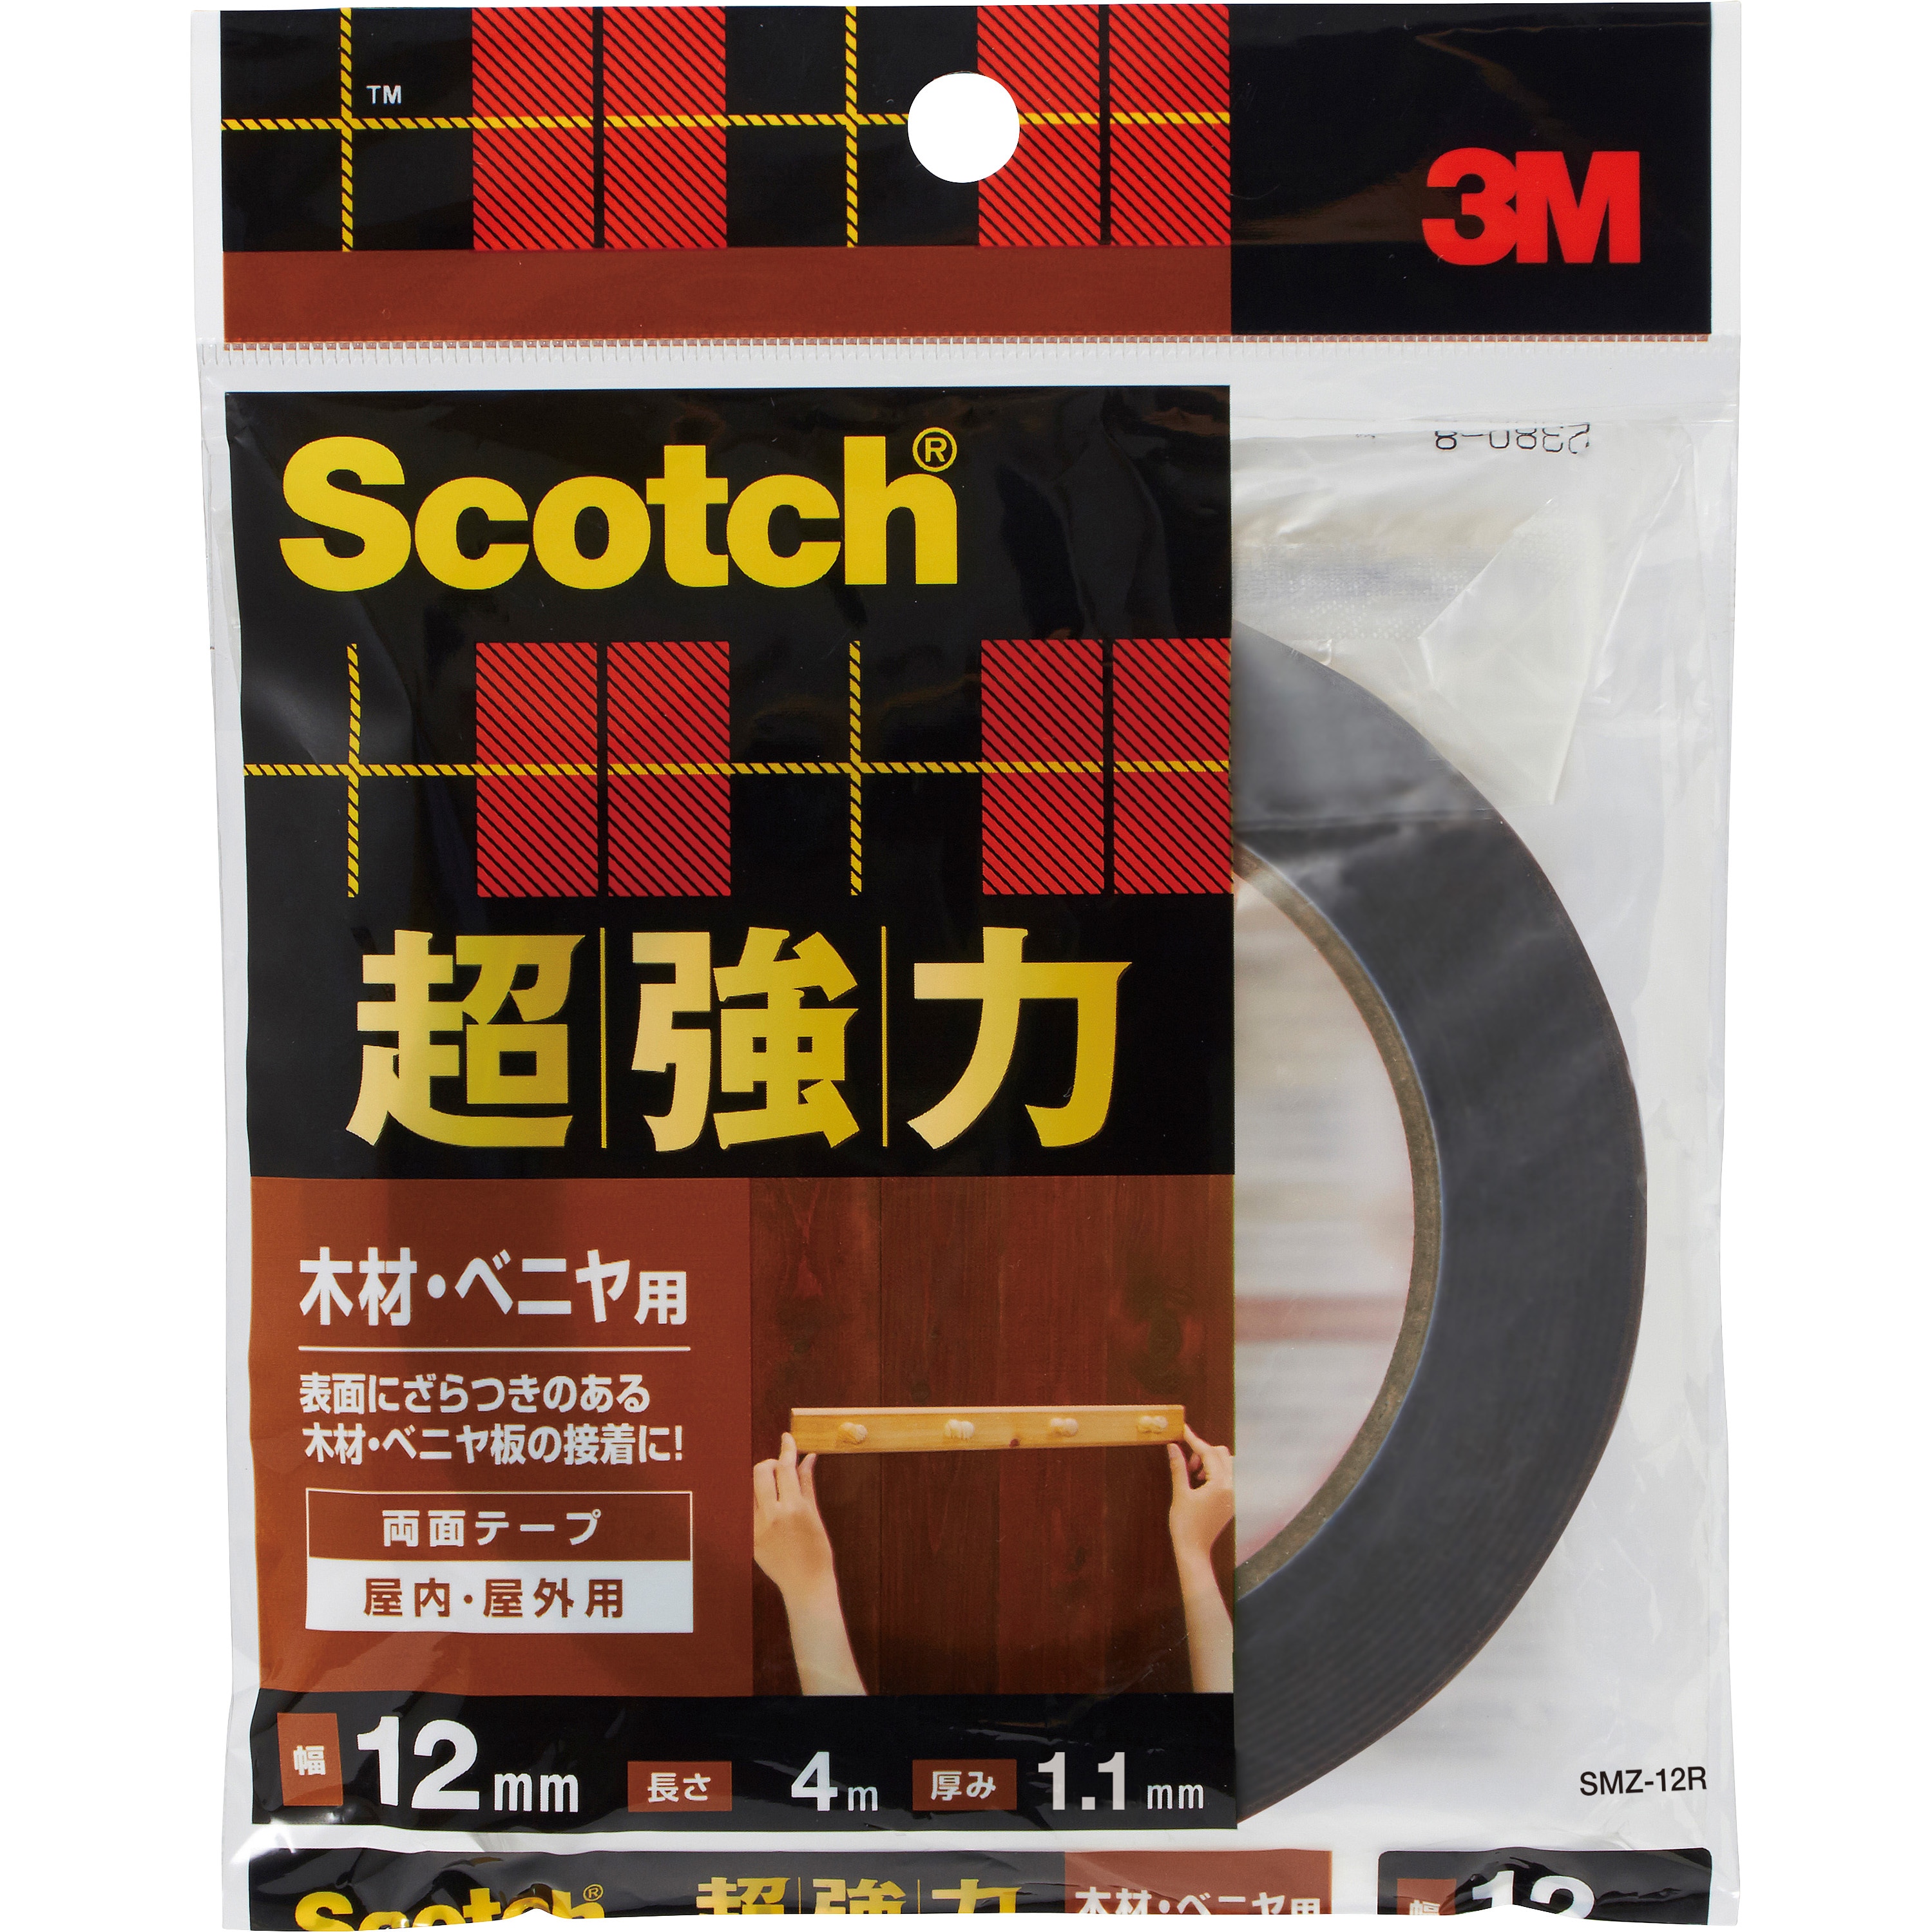 3M スコッチ 超強力両面テープスーパー多用途 12mm×4m 20巻 - 4